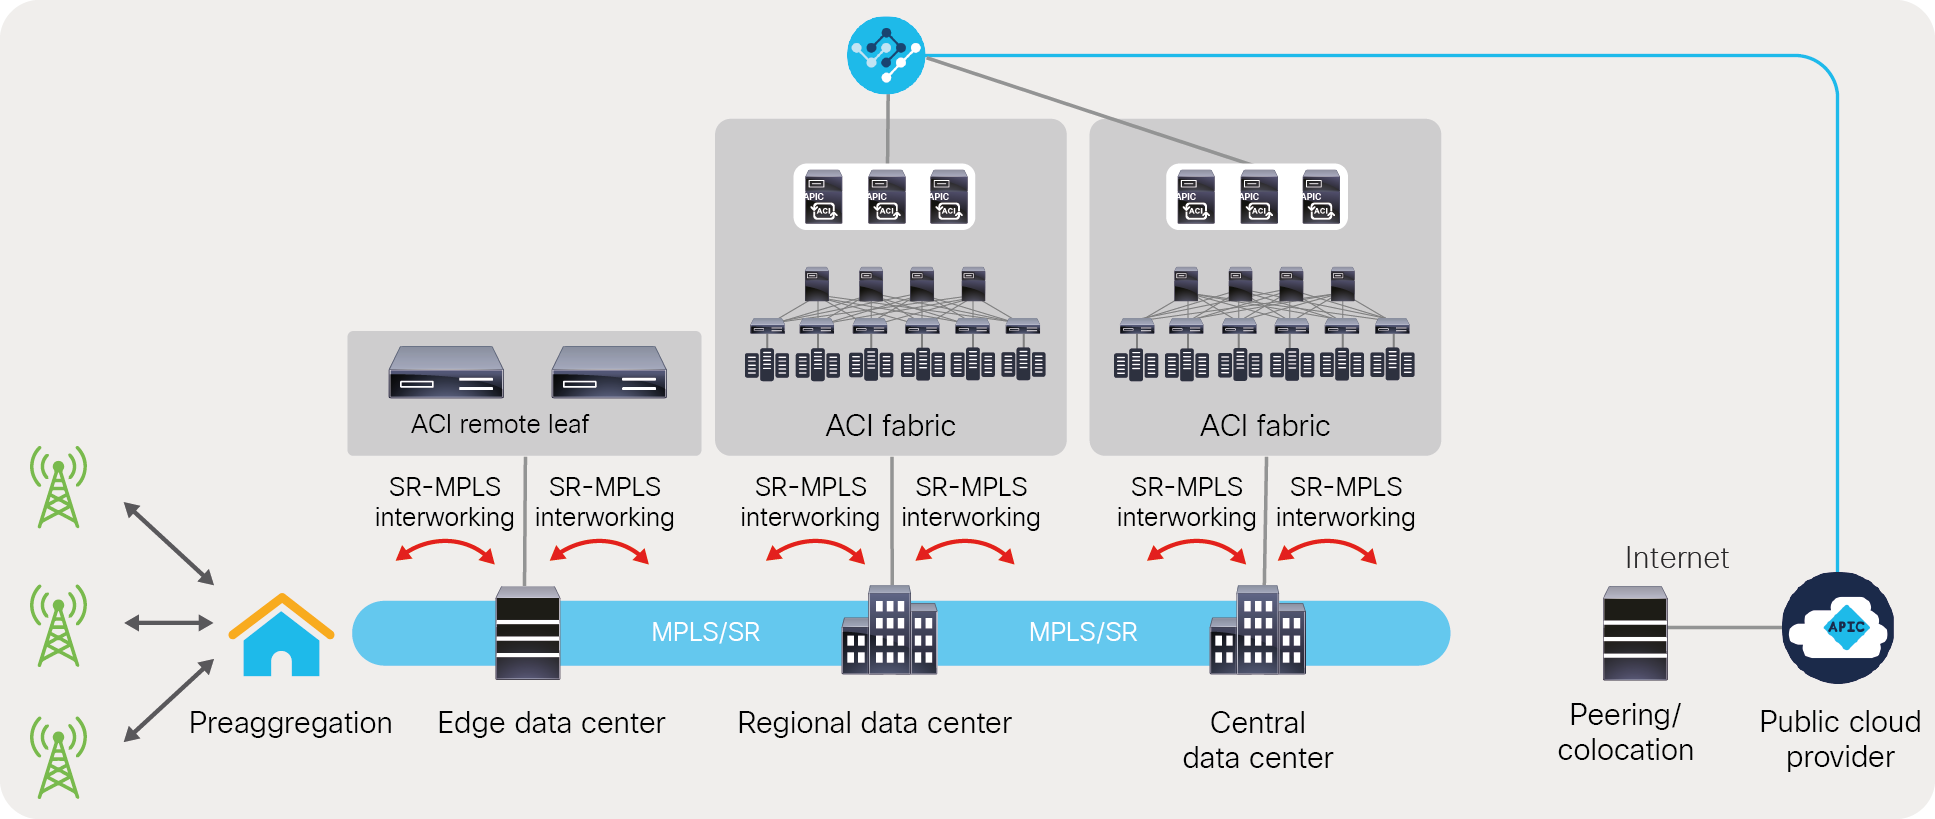 Unified SR/MPLS-based transport across distributed data centers built with Cisco ACI Multi-Site, Multi-Pod, and remote leaf